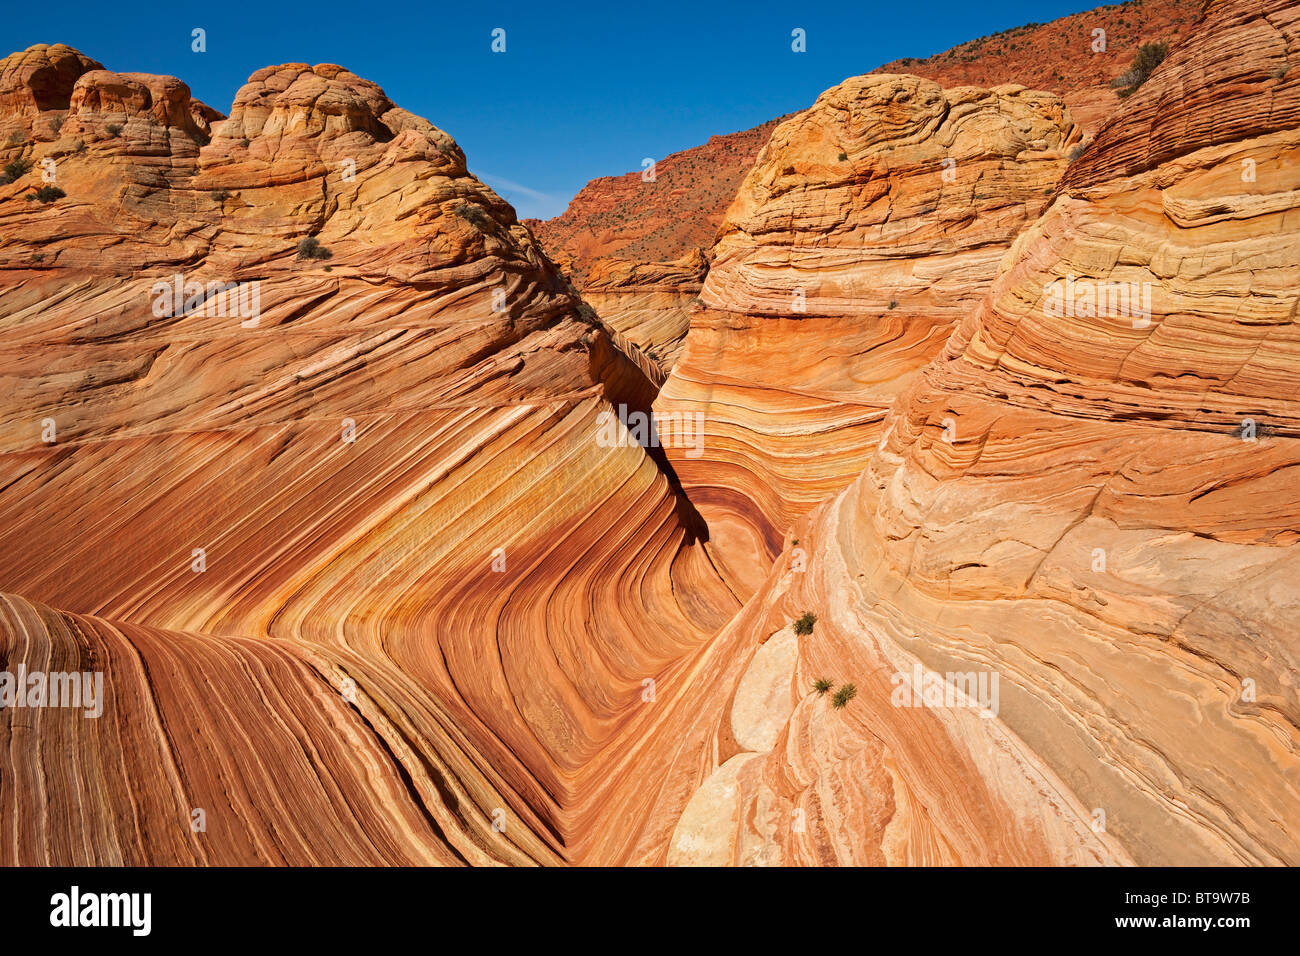 The Wave, rock formation in Coyote Buttes North, Paria Canyon-Vermilion Cliffs Wilderness, Utah, Arizona, USA Stock Photo